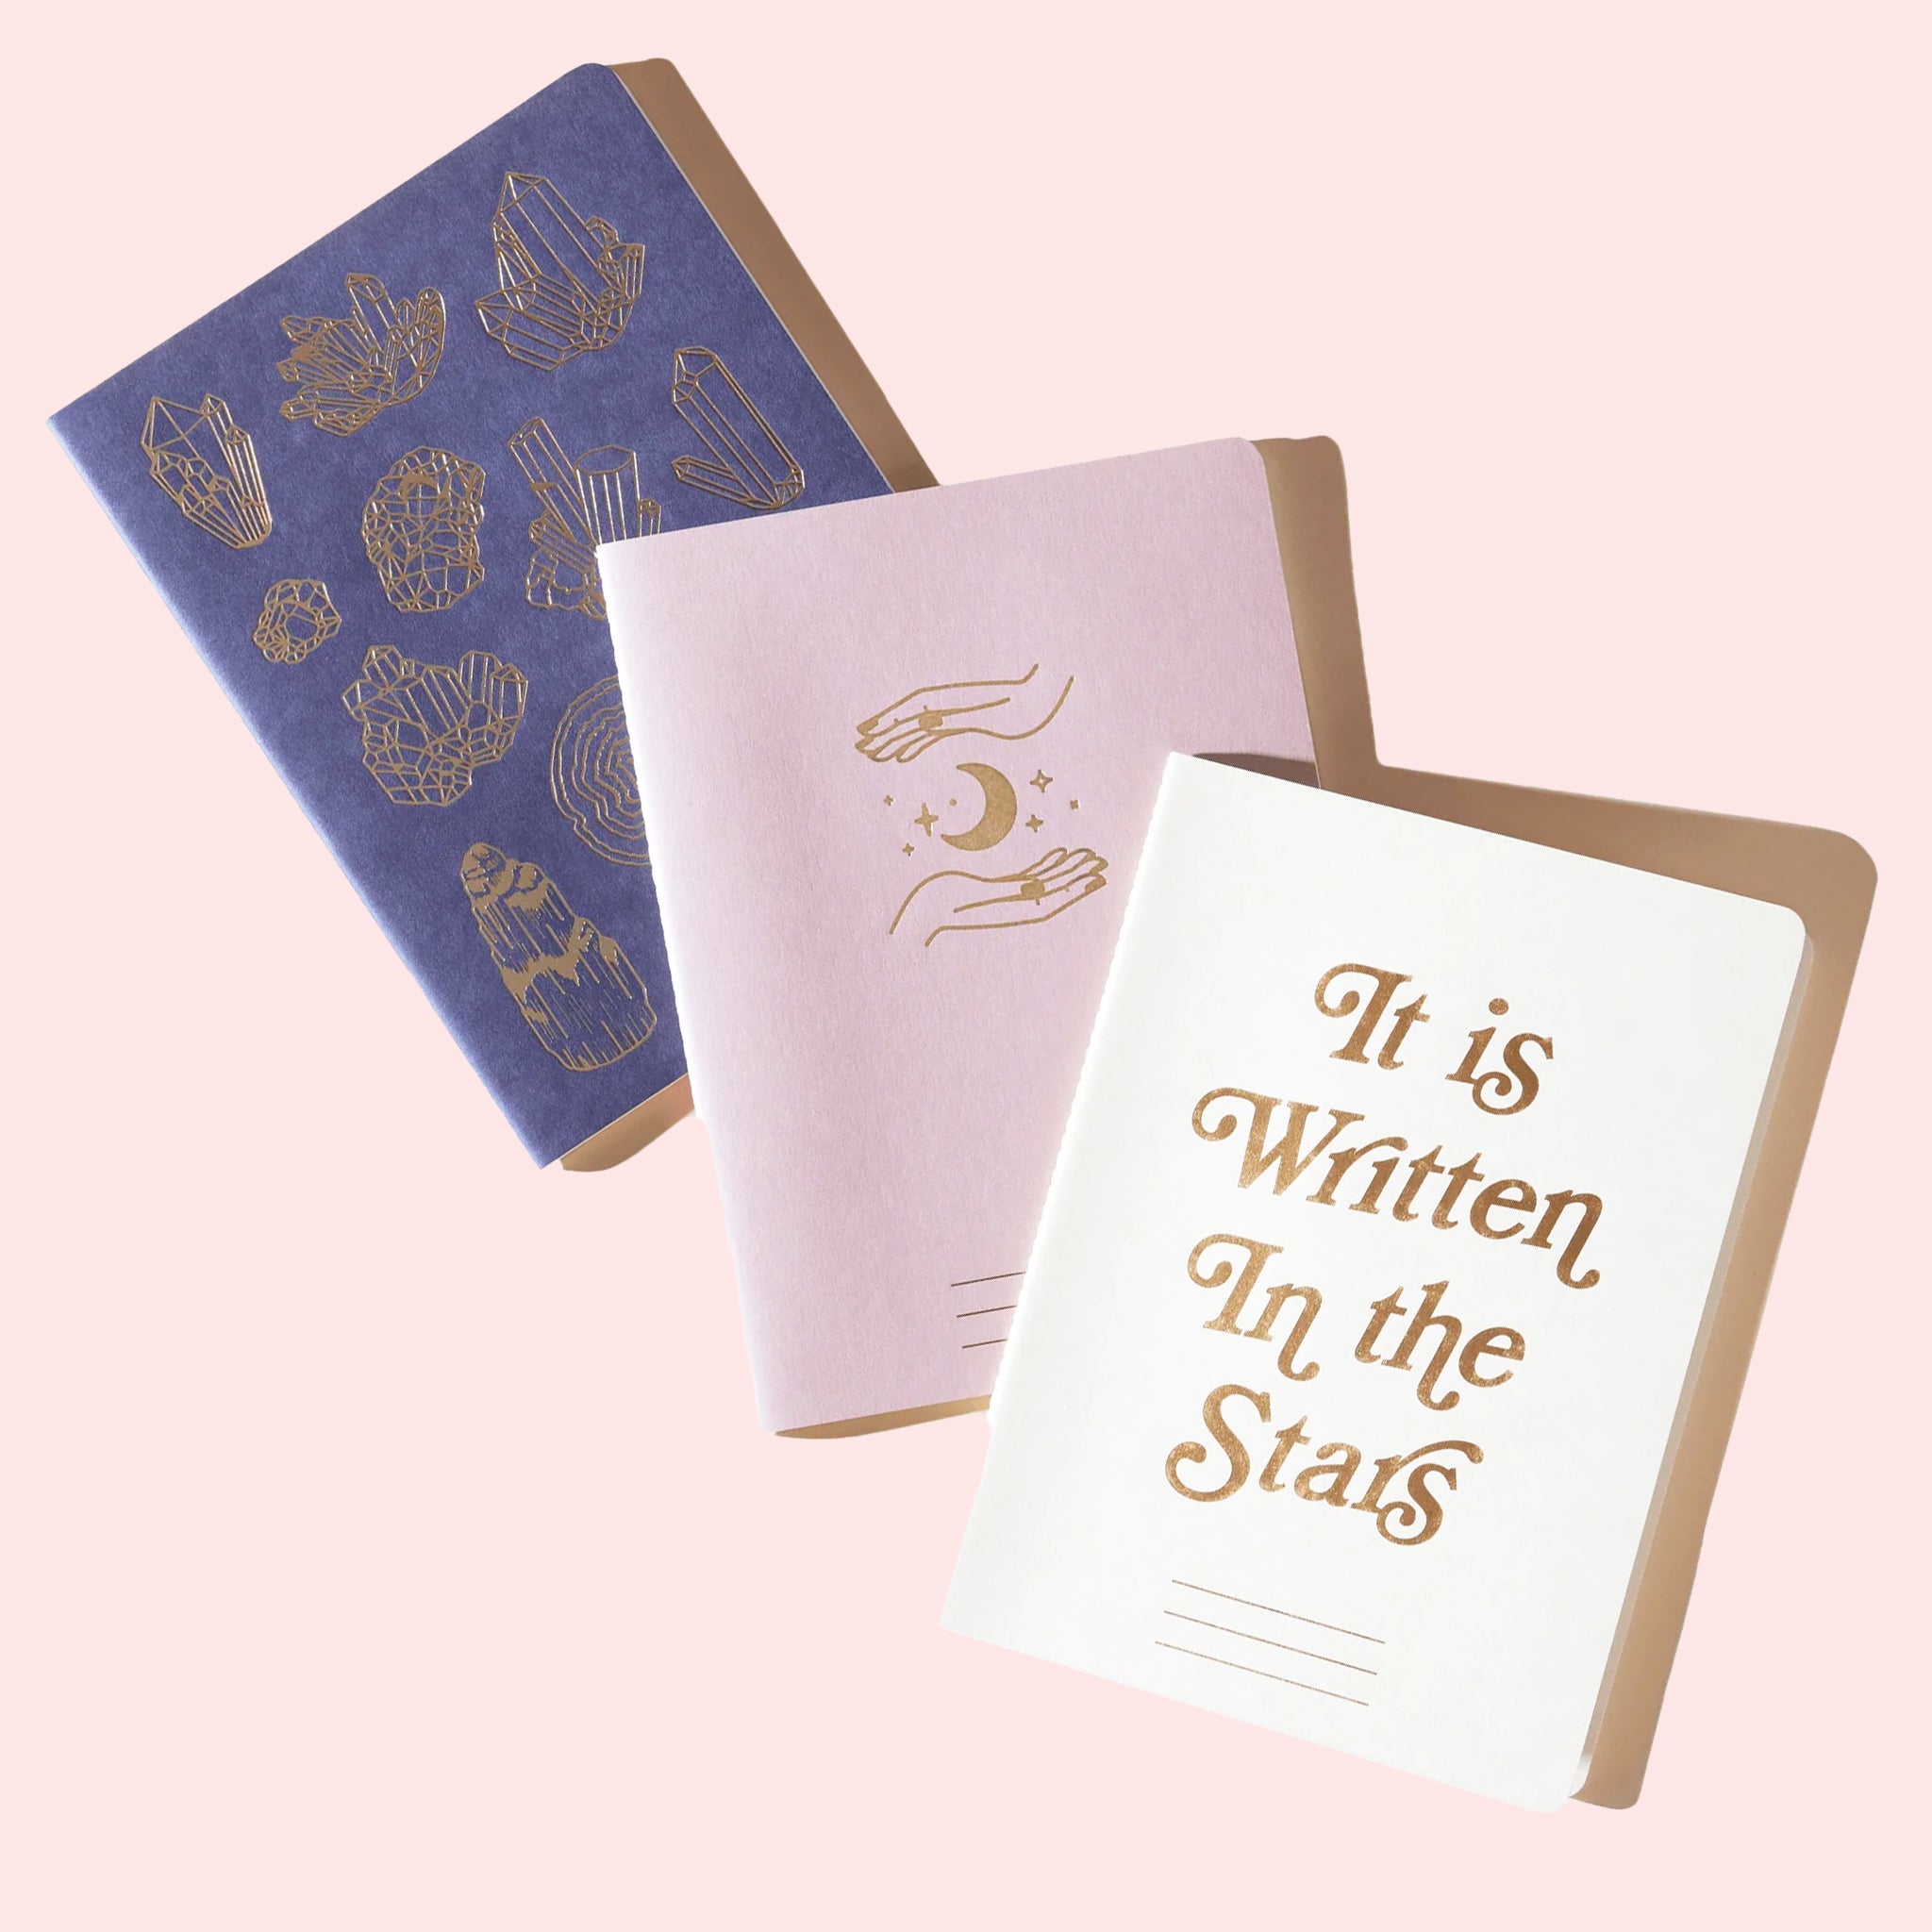 On a light pink background is three different notebooks, one blue/purple, one pink and the other ivory and reads, "It is Written In the Stars". 